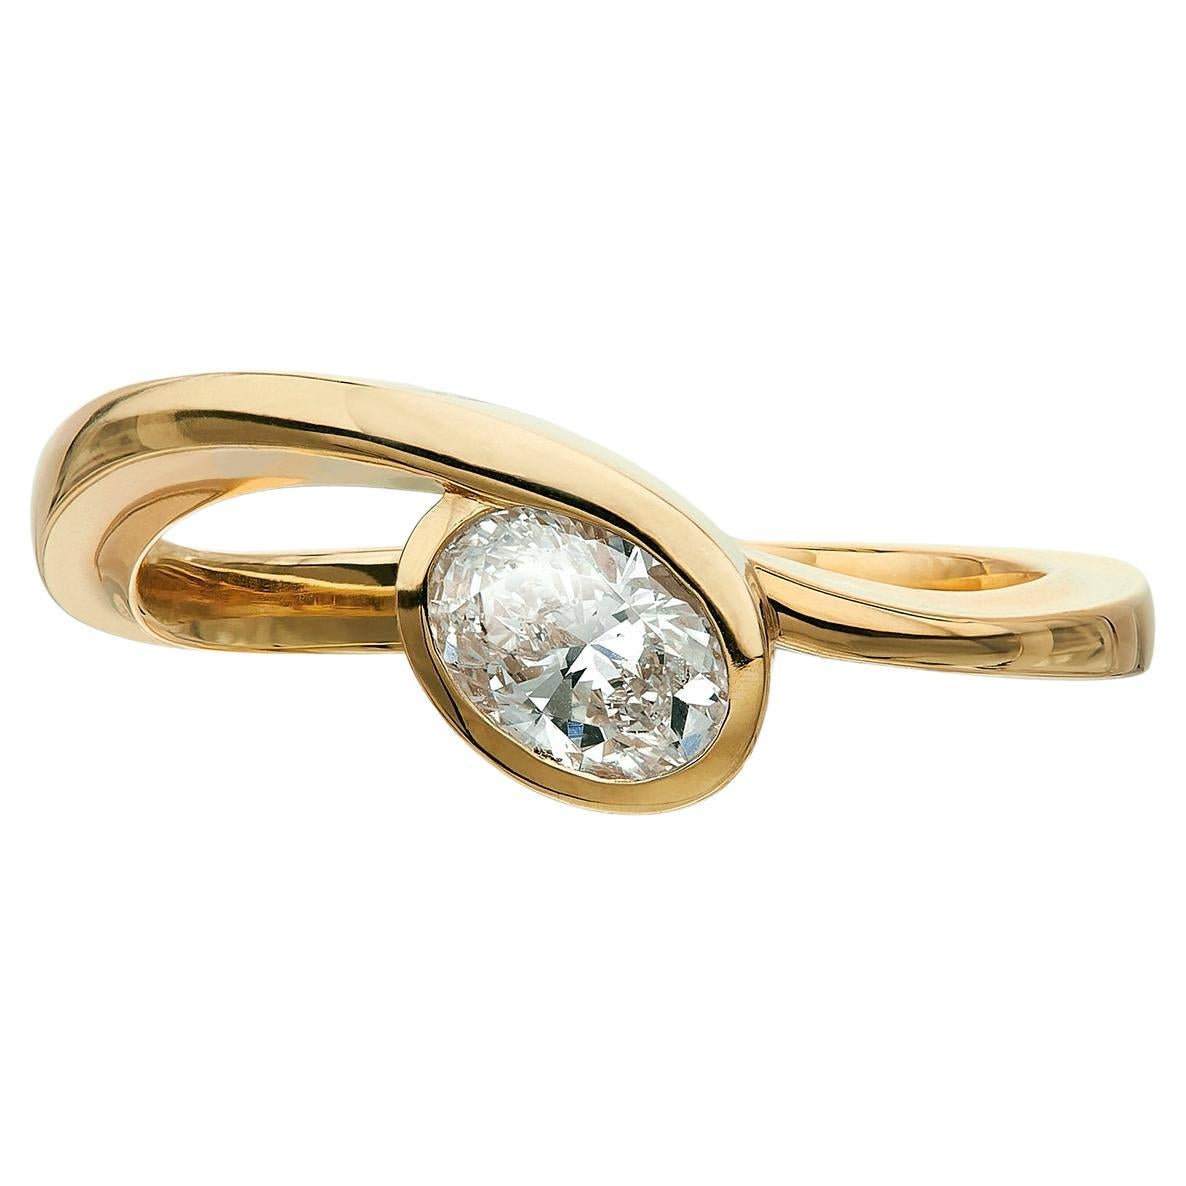 For Sale:  Handcrafted Diamond Solitaire ring - 18K yellow gold